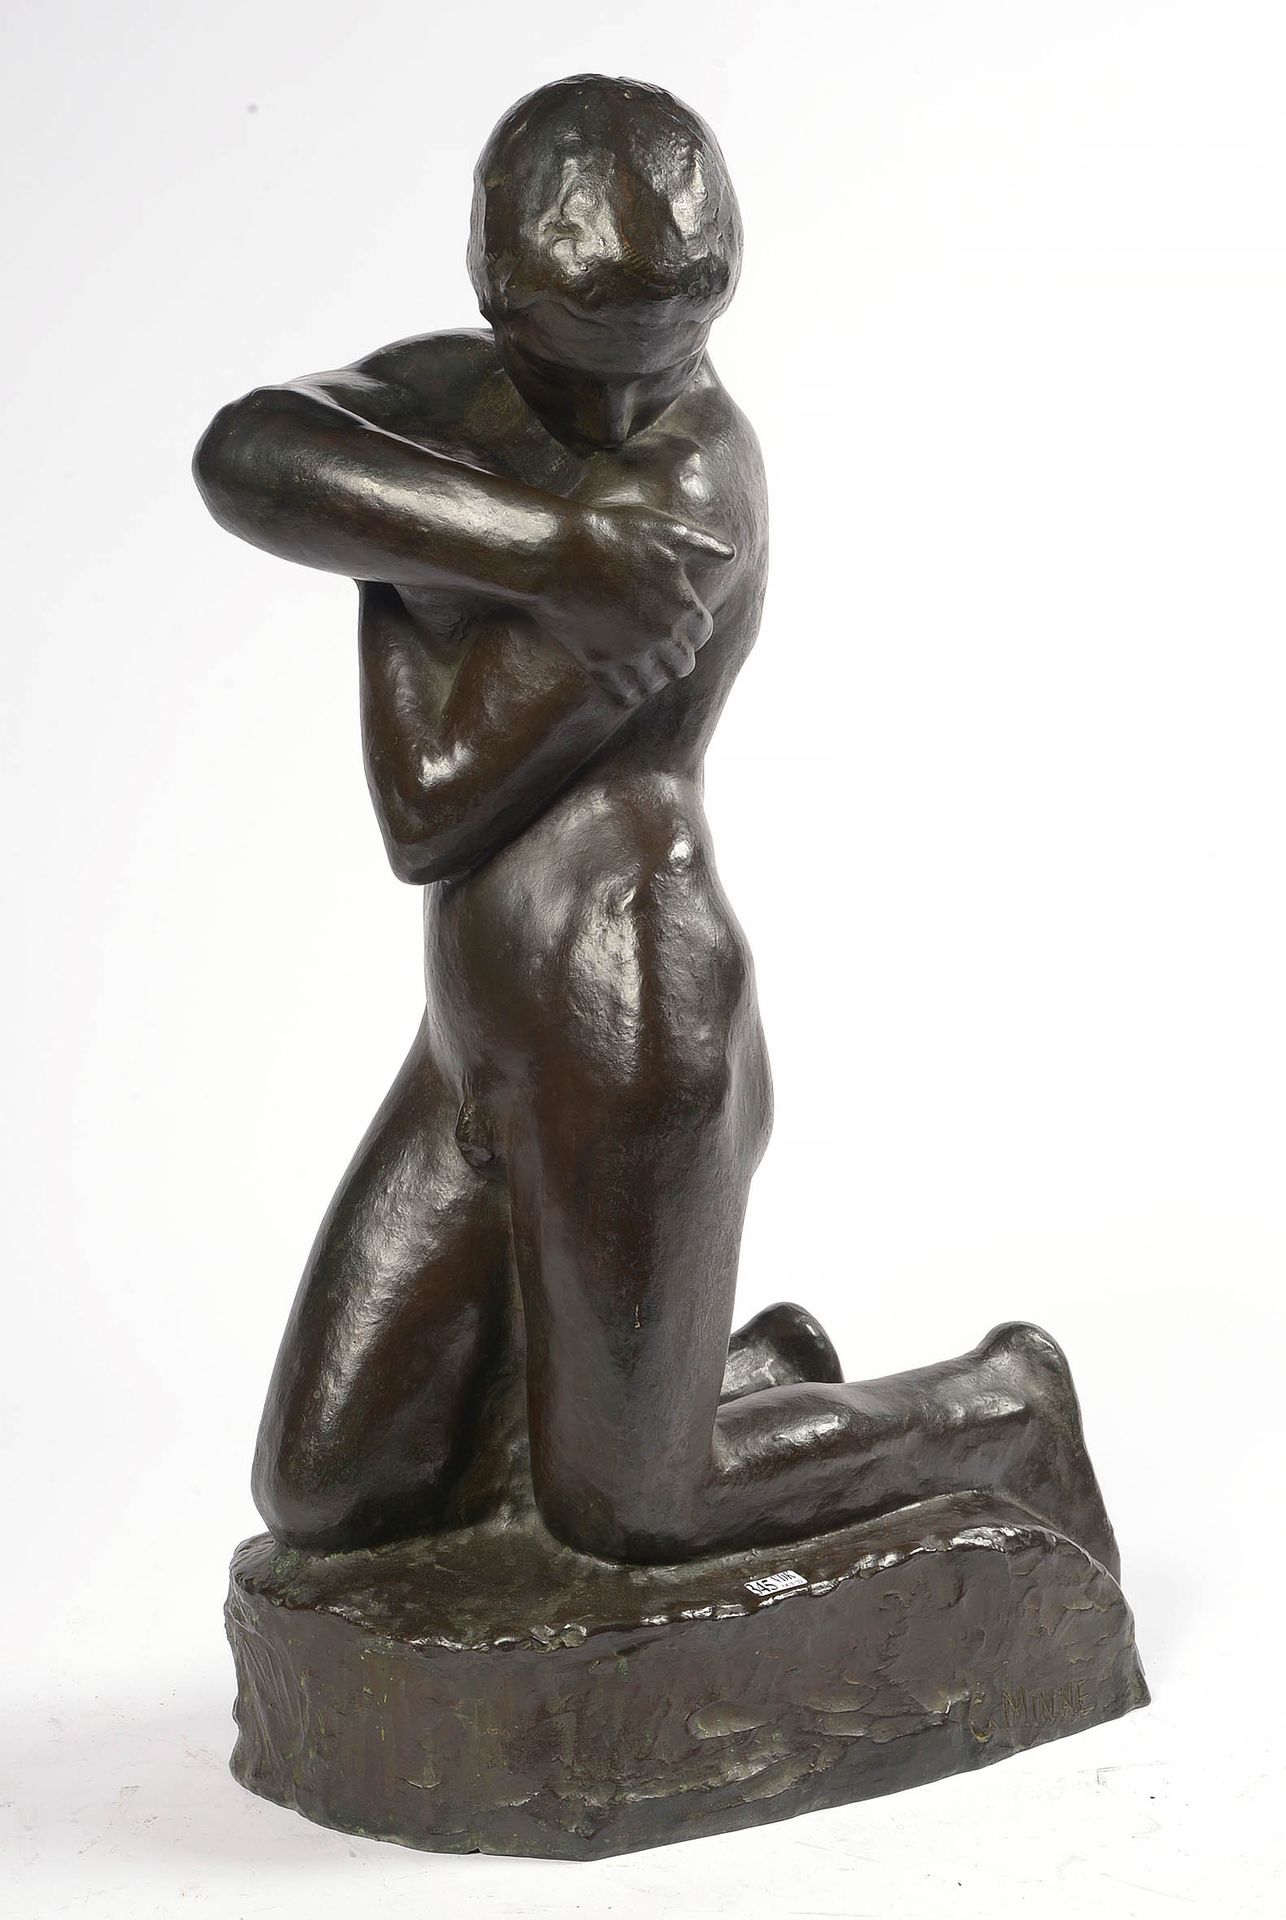 MINNE George (1866 - 1941) "The kneeling with the shell" in bronze with a greeni&hellip;